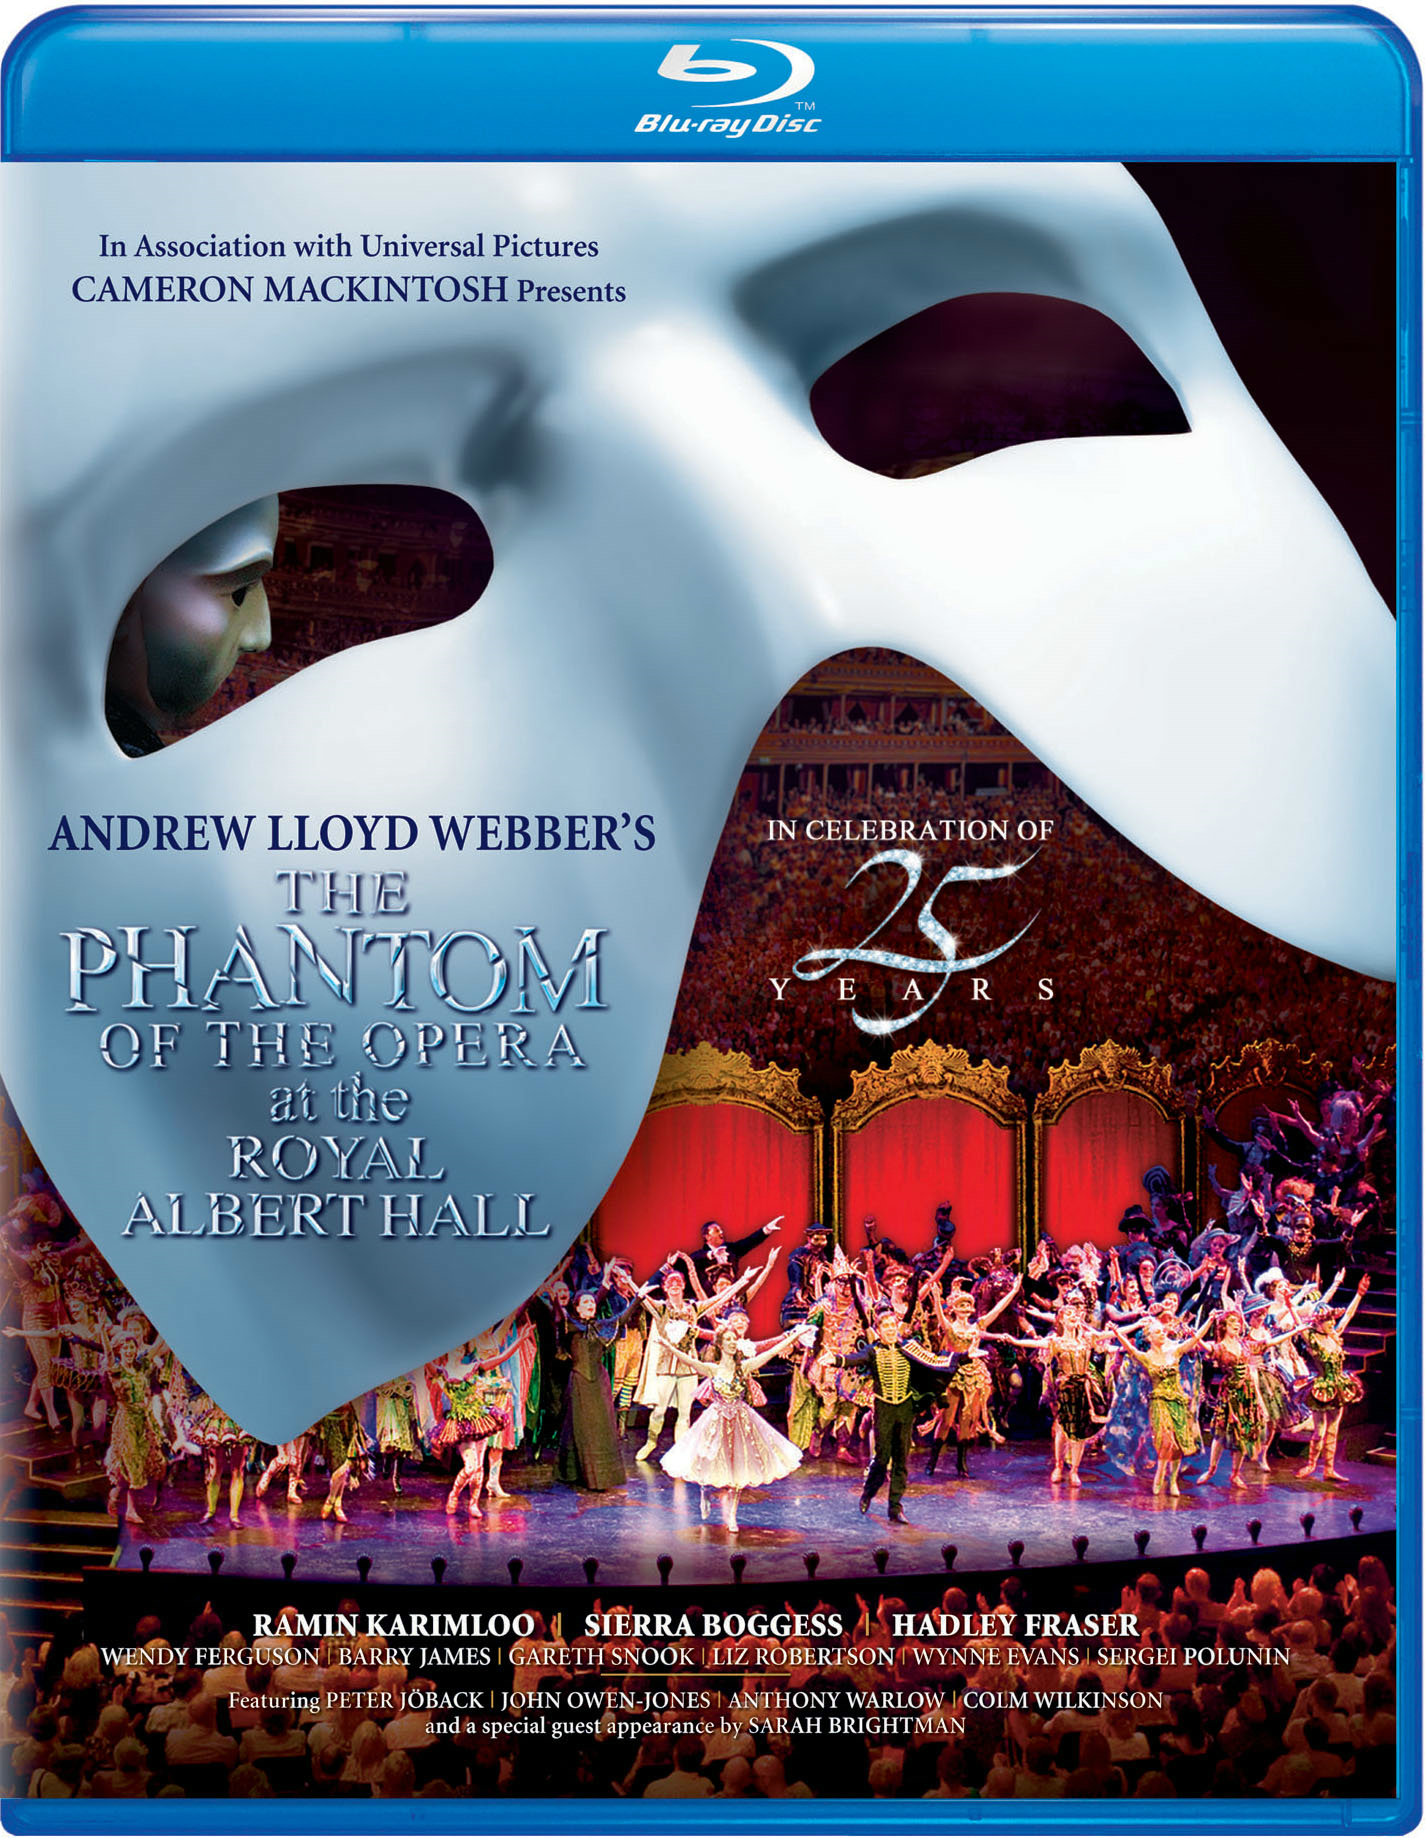 The Phantom Of The Opera At The Albert Hall - 25th Anniversary - Blu-ray [ 2011 ]  - Stage Musicals Music On Blu-ray